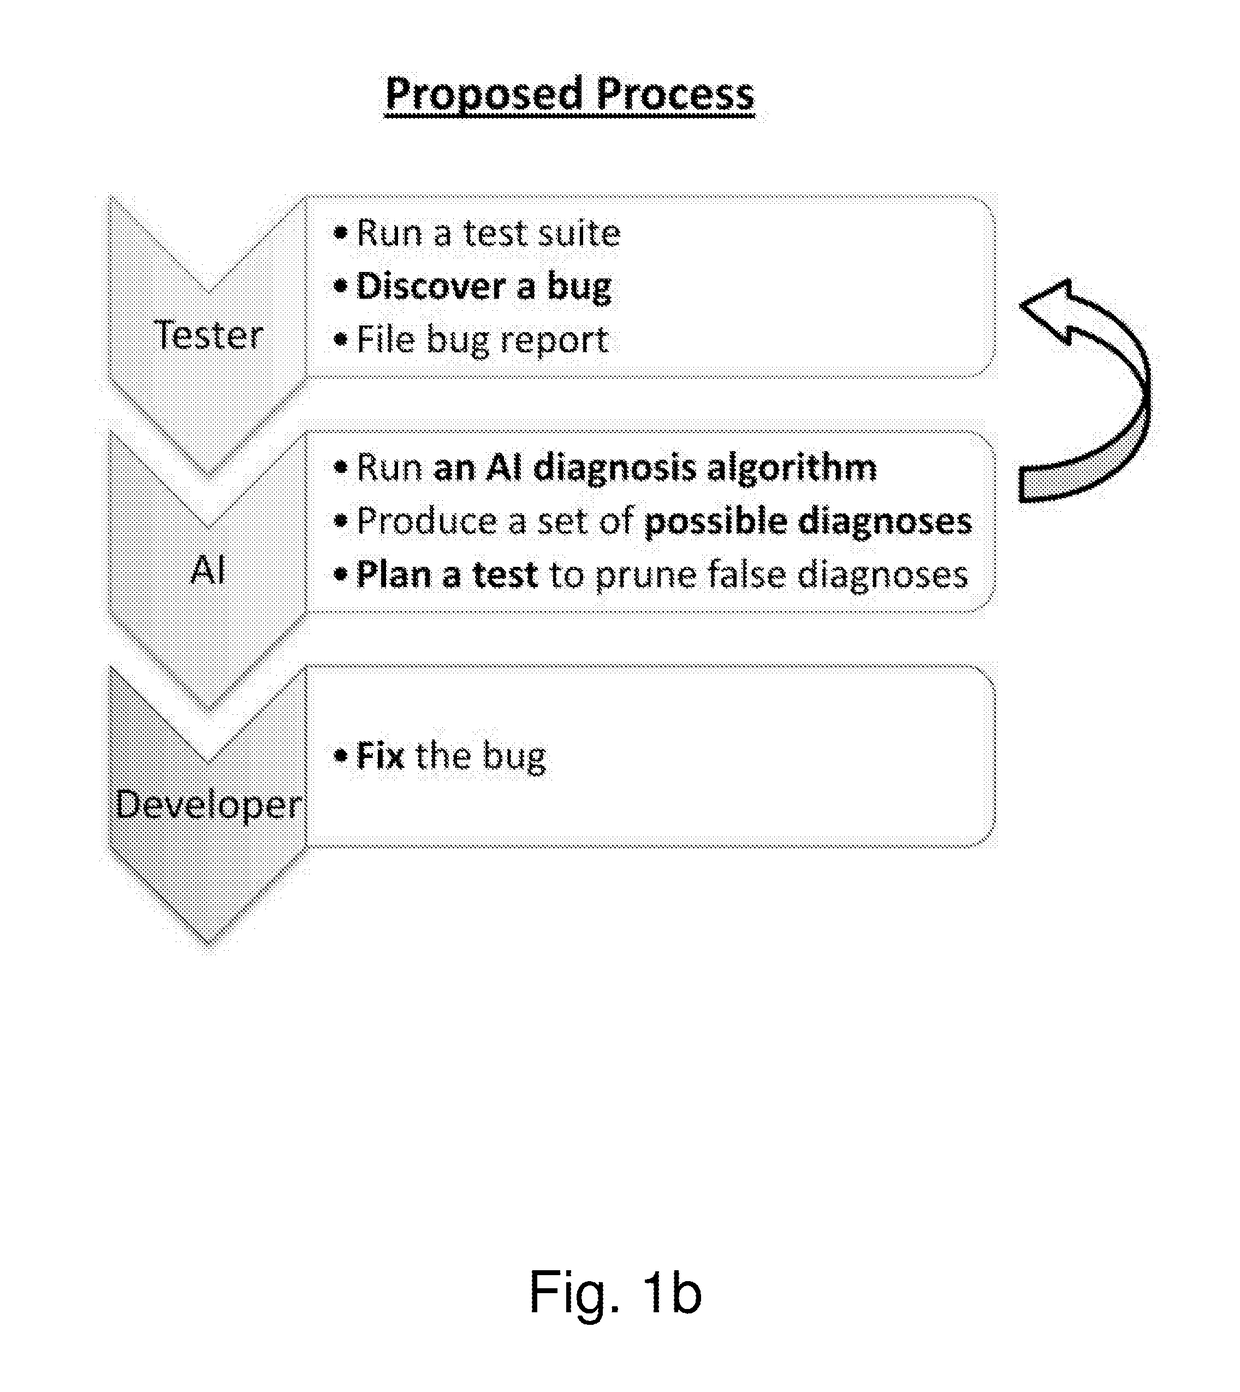 Using model-based diagnosis to improve software testing